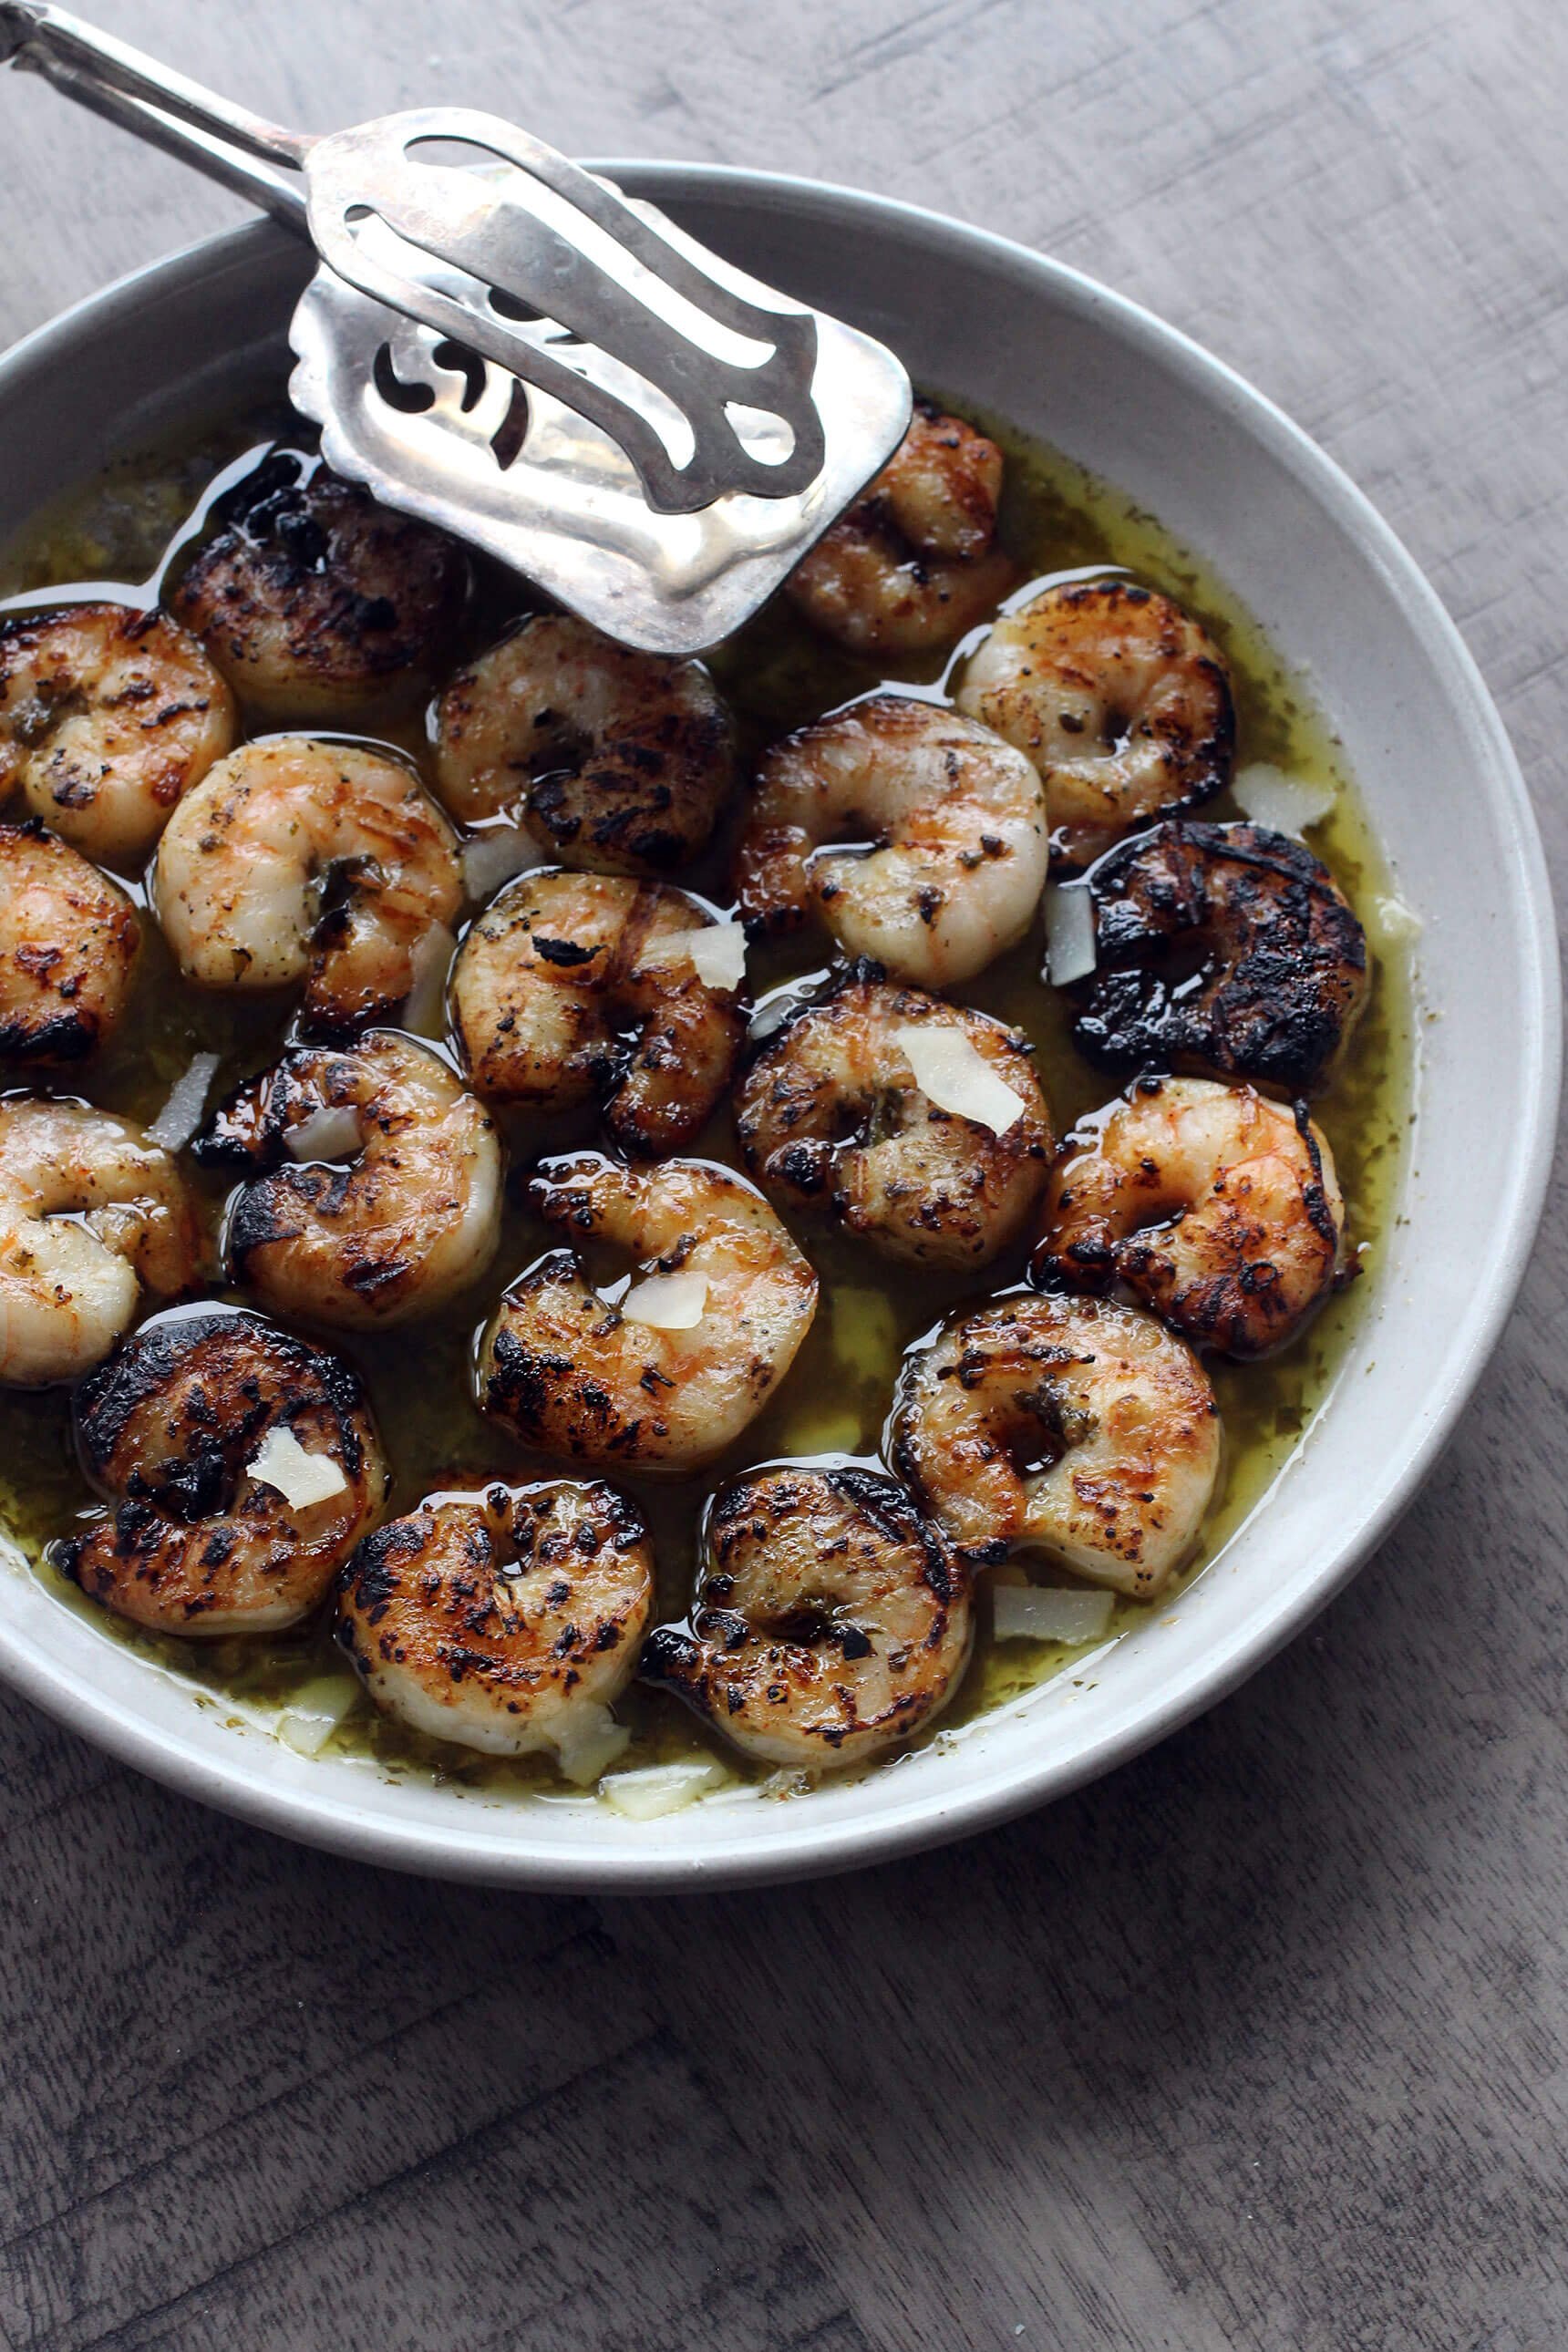 WHITE WINE BUTTER AND HERB GRILLED SHRIMP